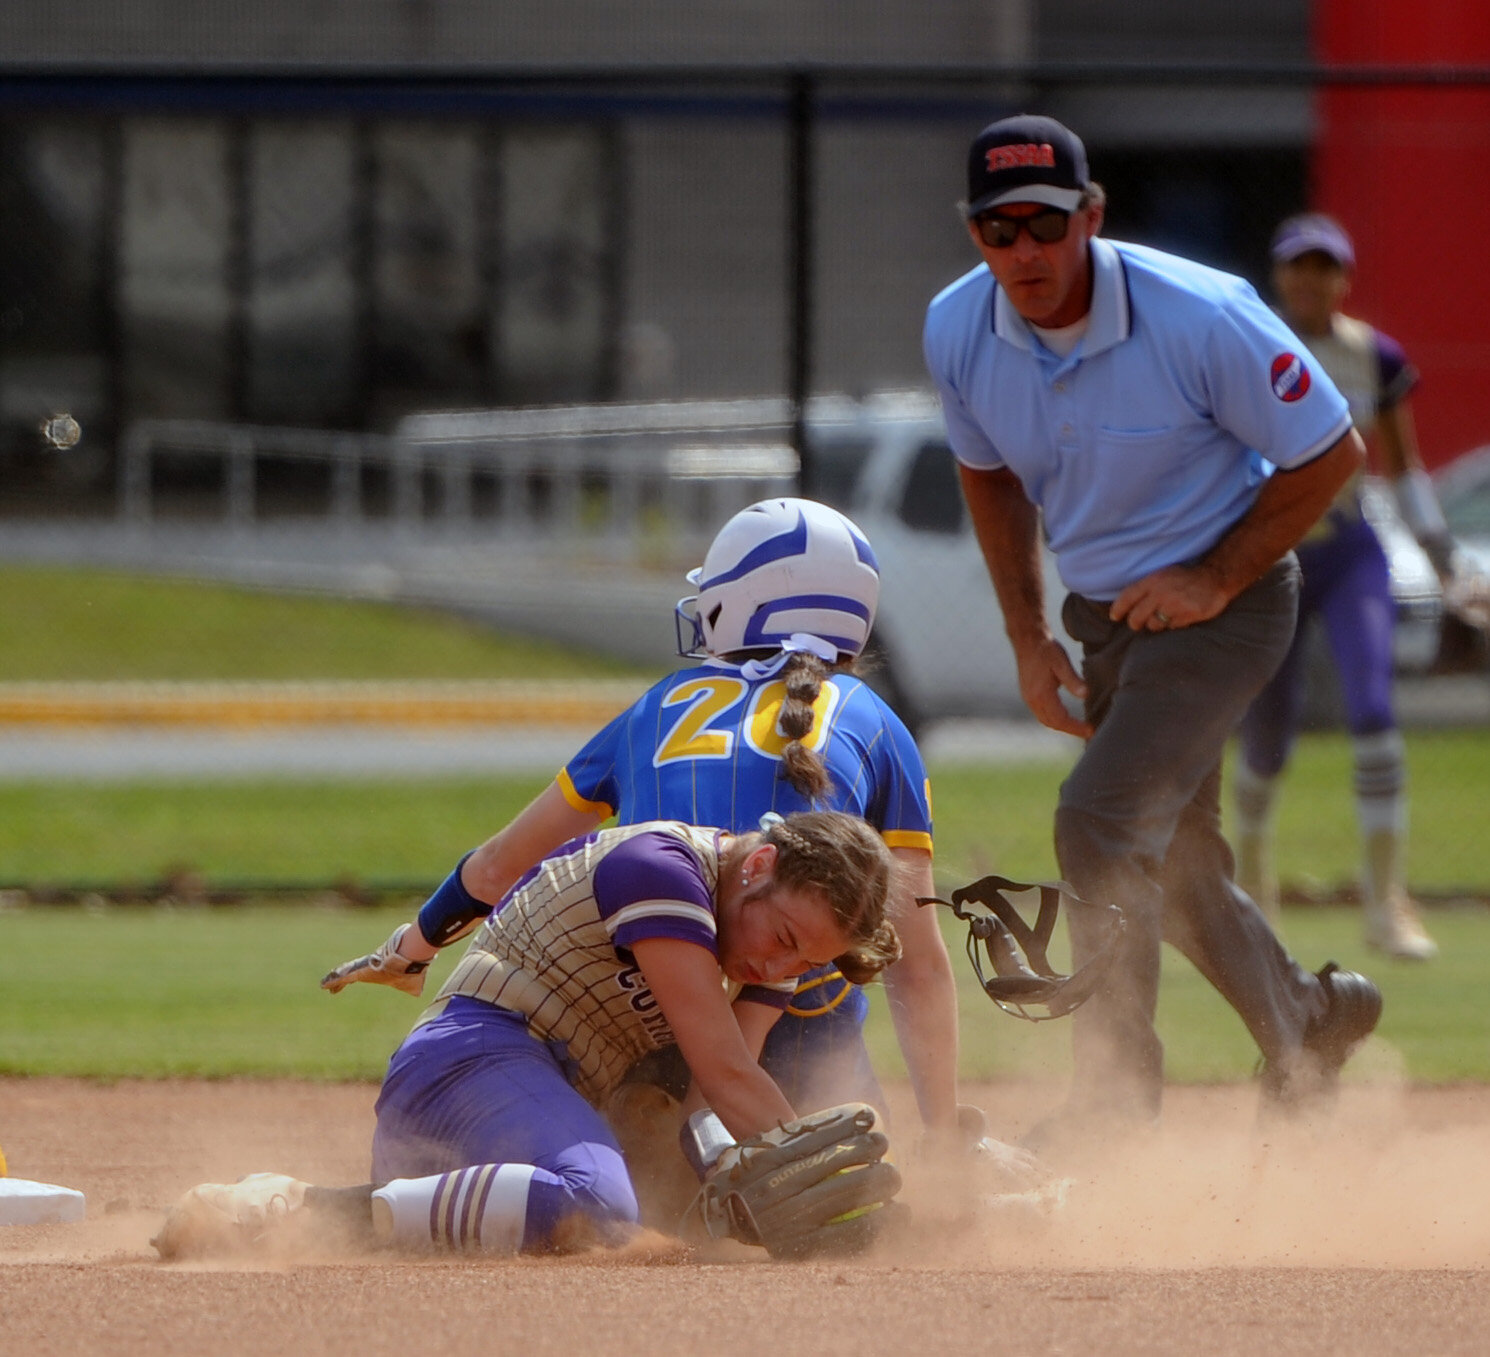 Viqueen short stop Abi Brown collides with a Westview baserunner for the out at second base during the first inning.